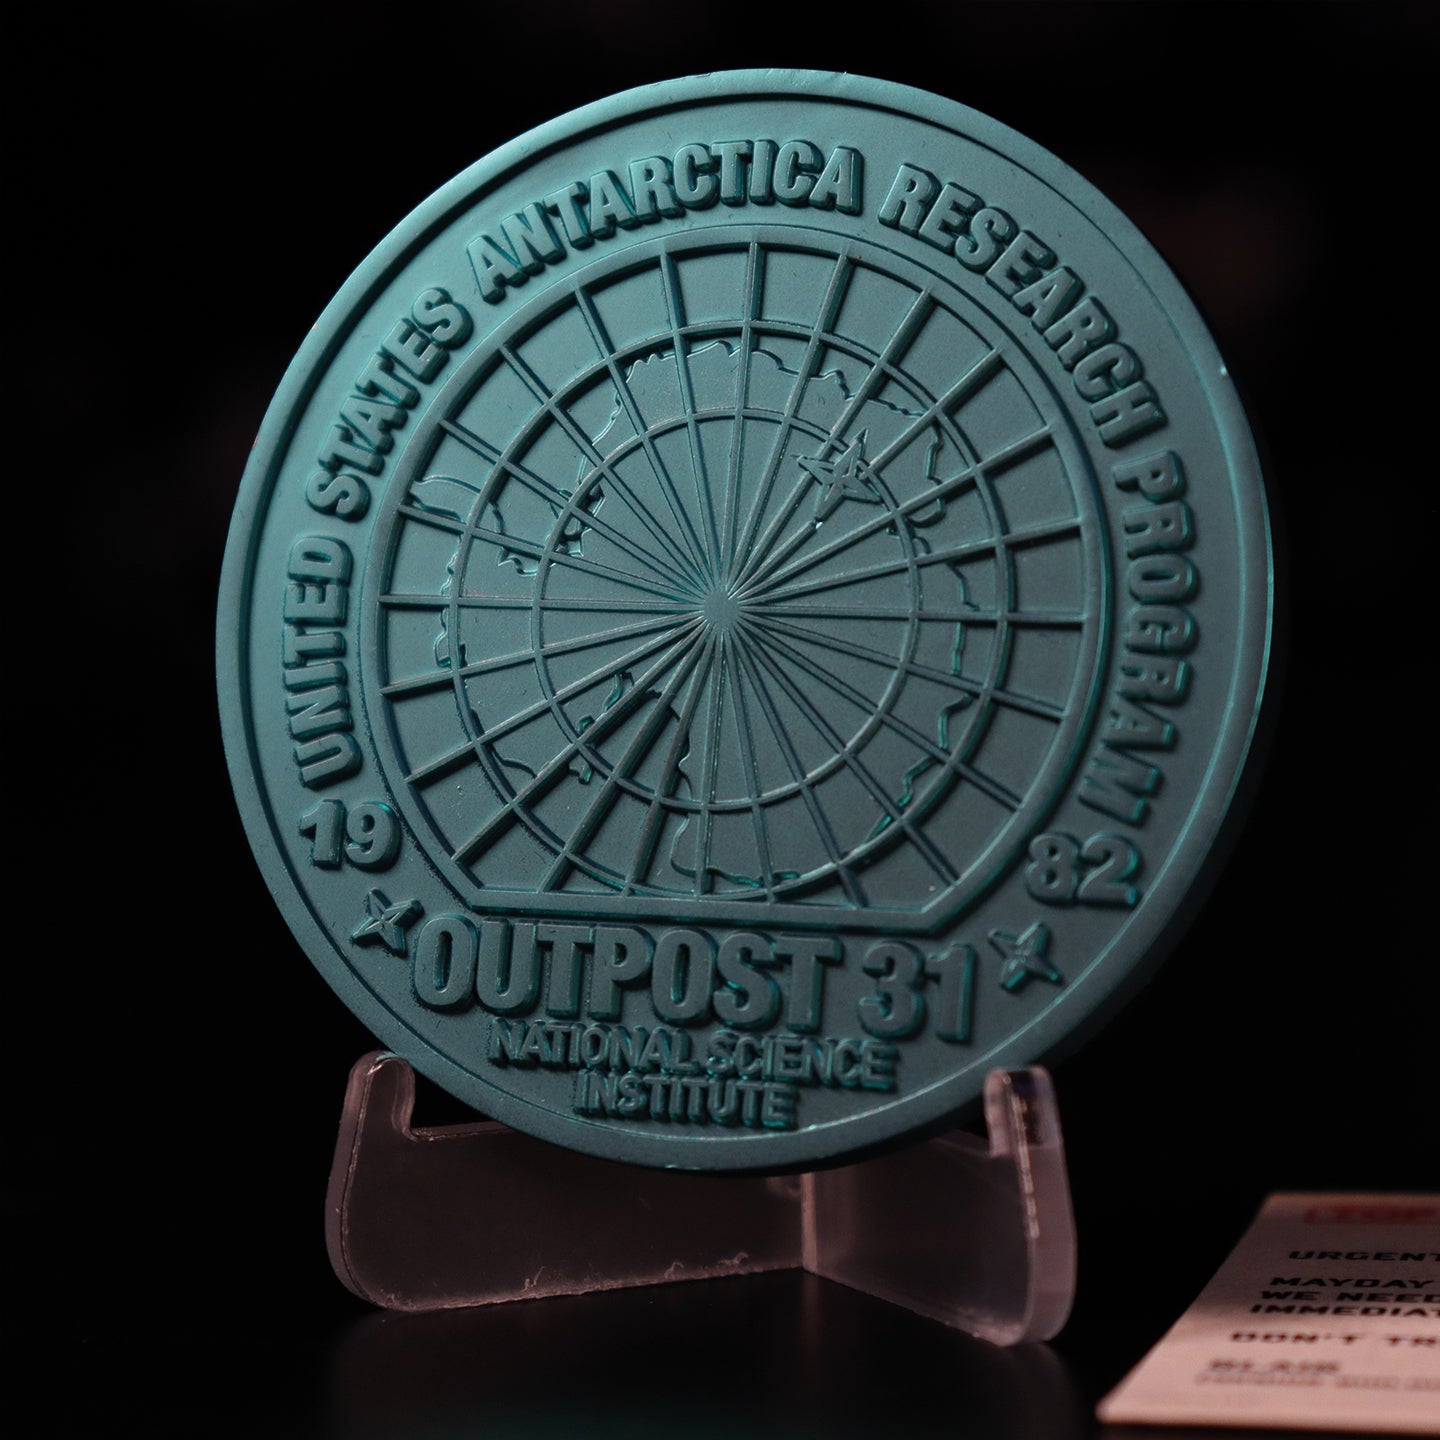 The Thing Limited Edition Outpost 31 Medallion